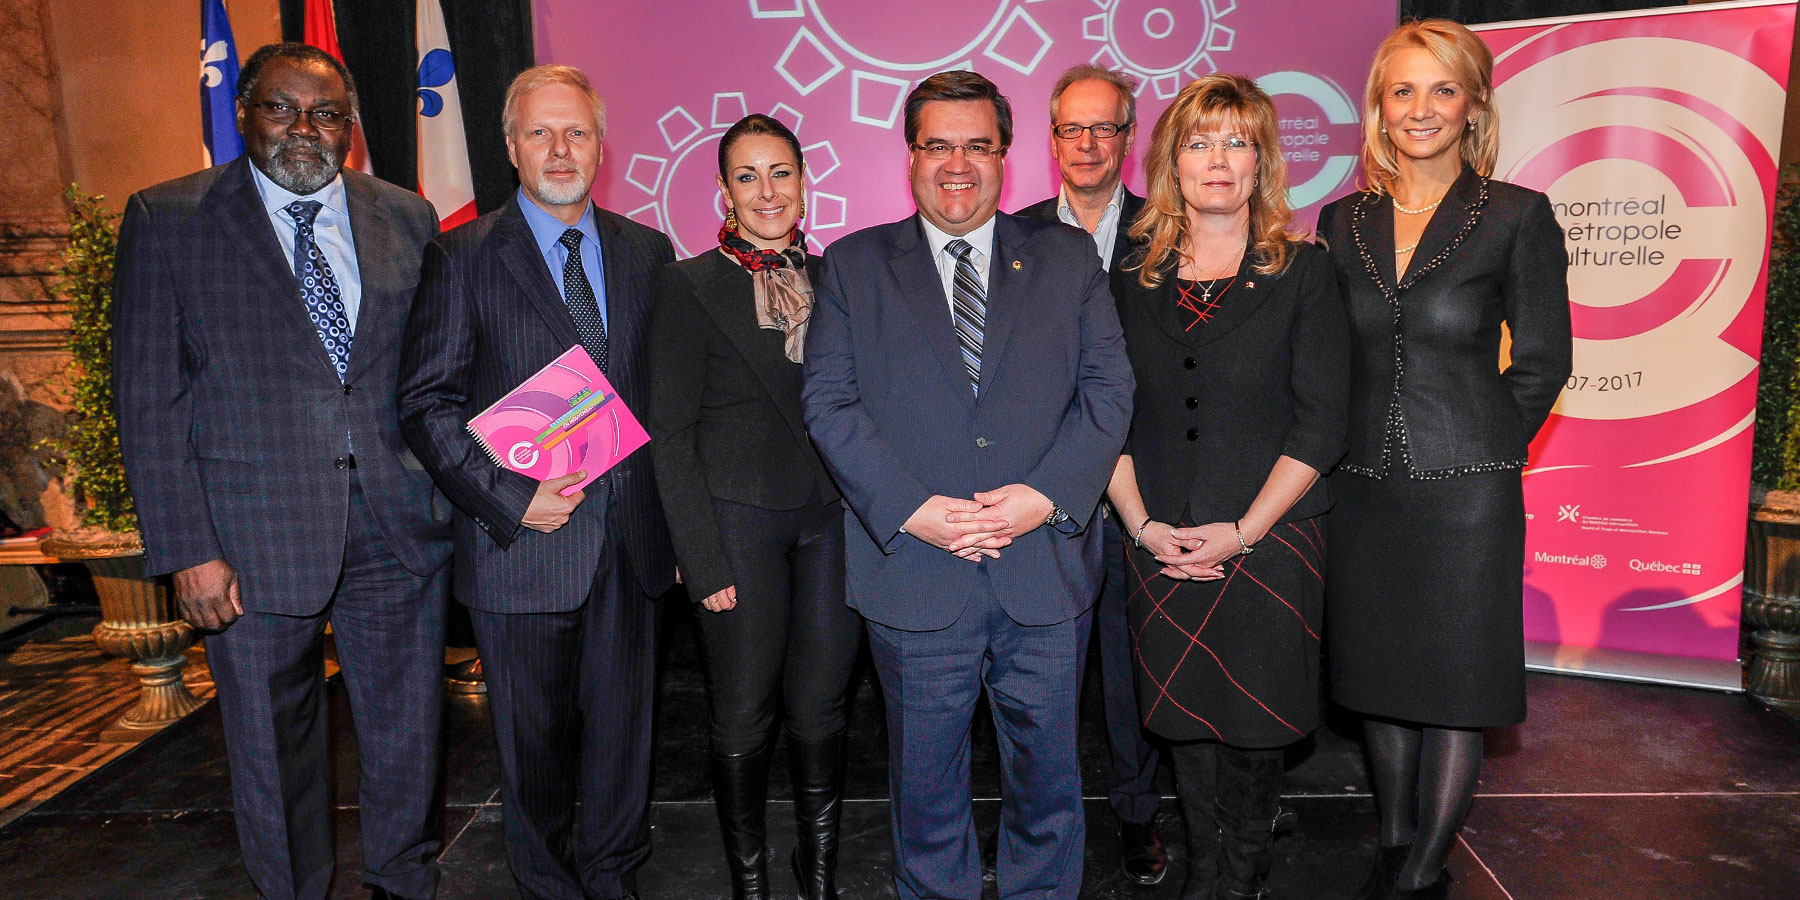 Members of the 2007-2017 Action Plan Steering Committee during the launch of 2013 At A Glance. Left to right: Maka Kotto, Jean-Franois Lise, Manon Gauthier, Denis Coderre, Simon Brault, Shelly Glover and Manuela Goya.